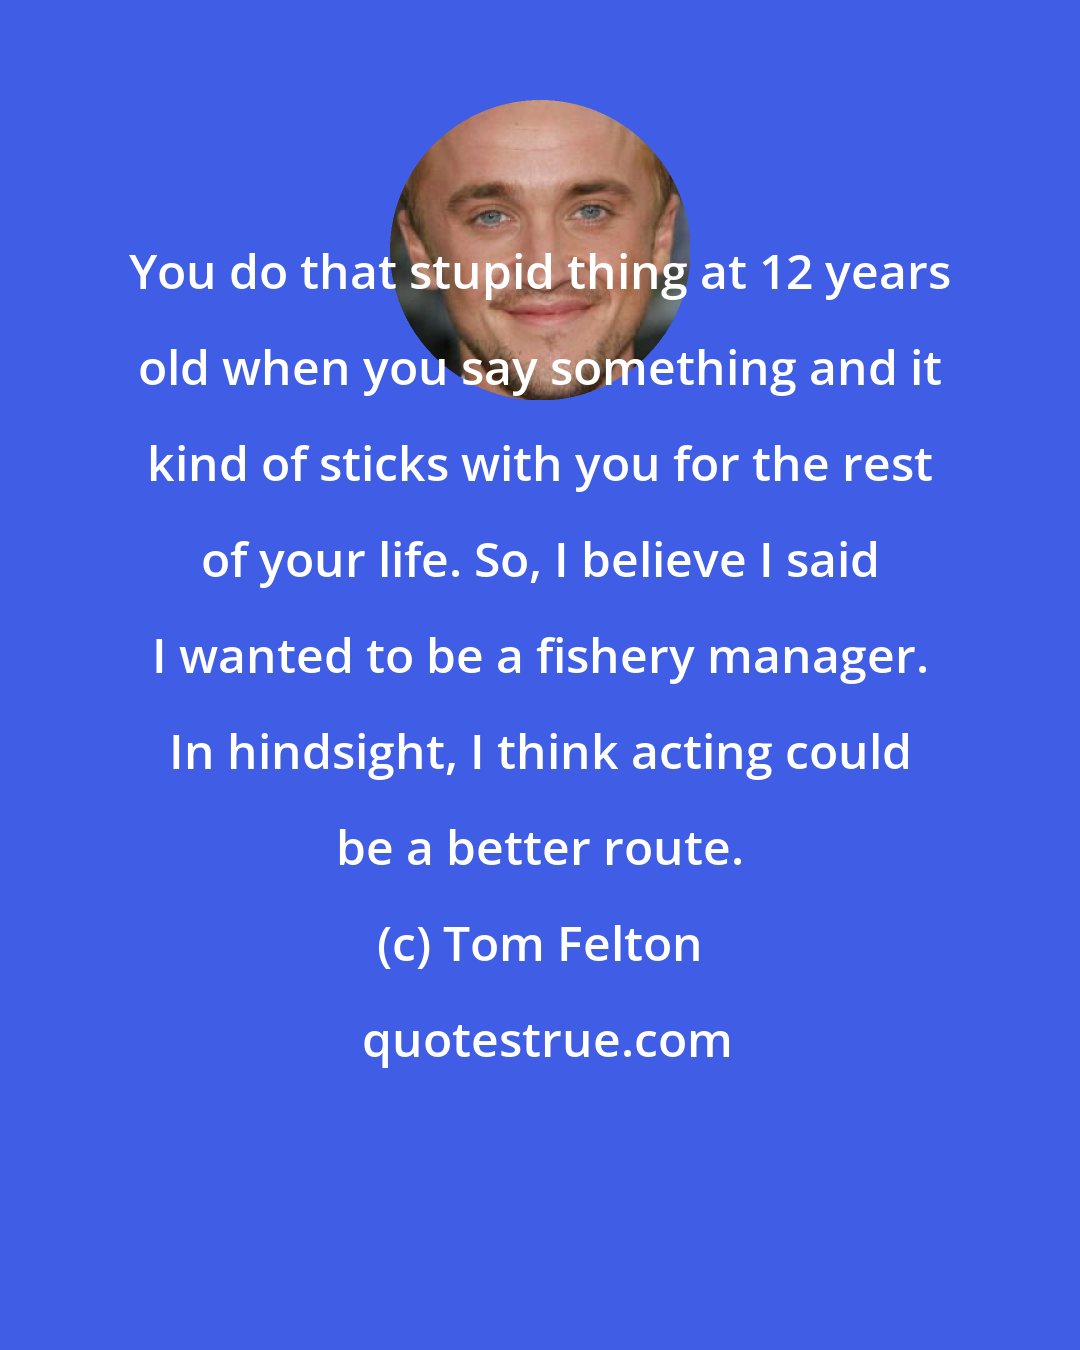 Tom Felton: You do that stupid thing at 12 years old when you say something and it kind of sticks with you for the rest of your life. So, I believe I said I wanted to be a fishery manager. In hindsight, I think acting could be a better route.